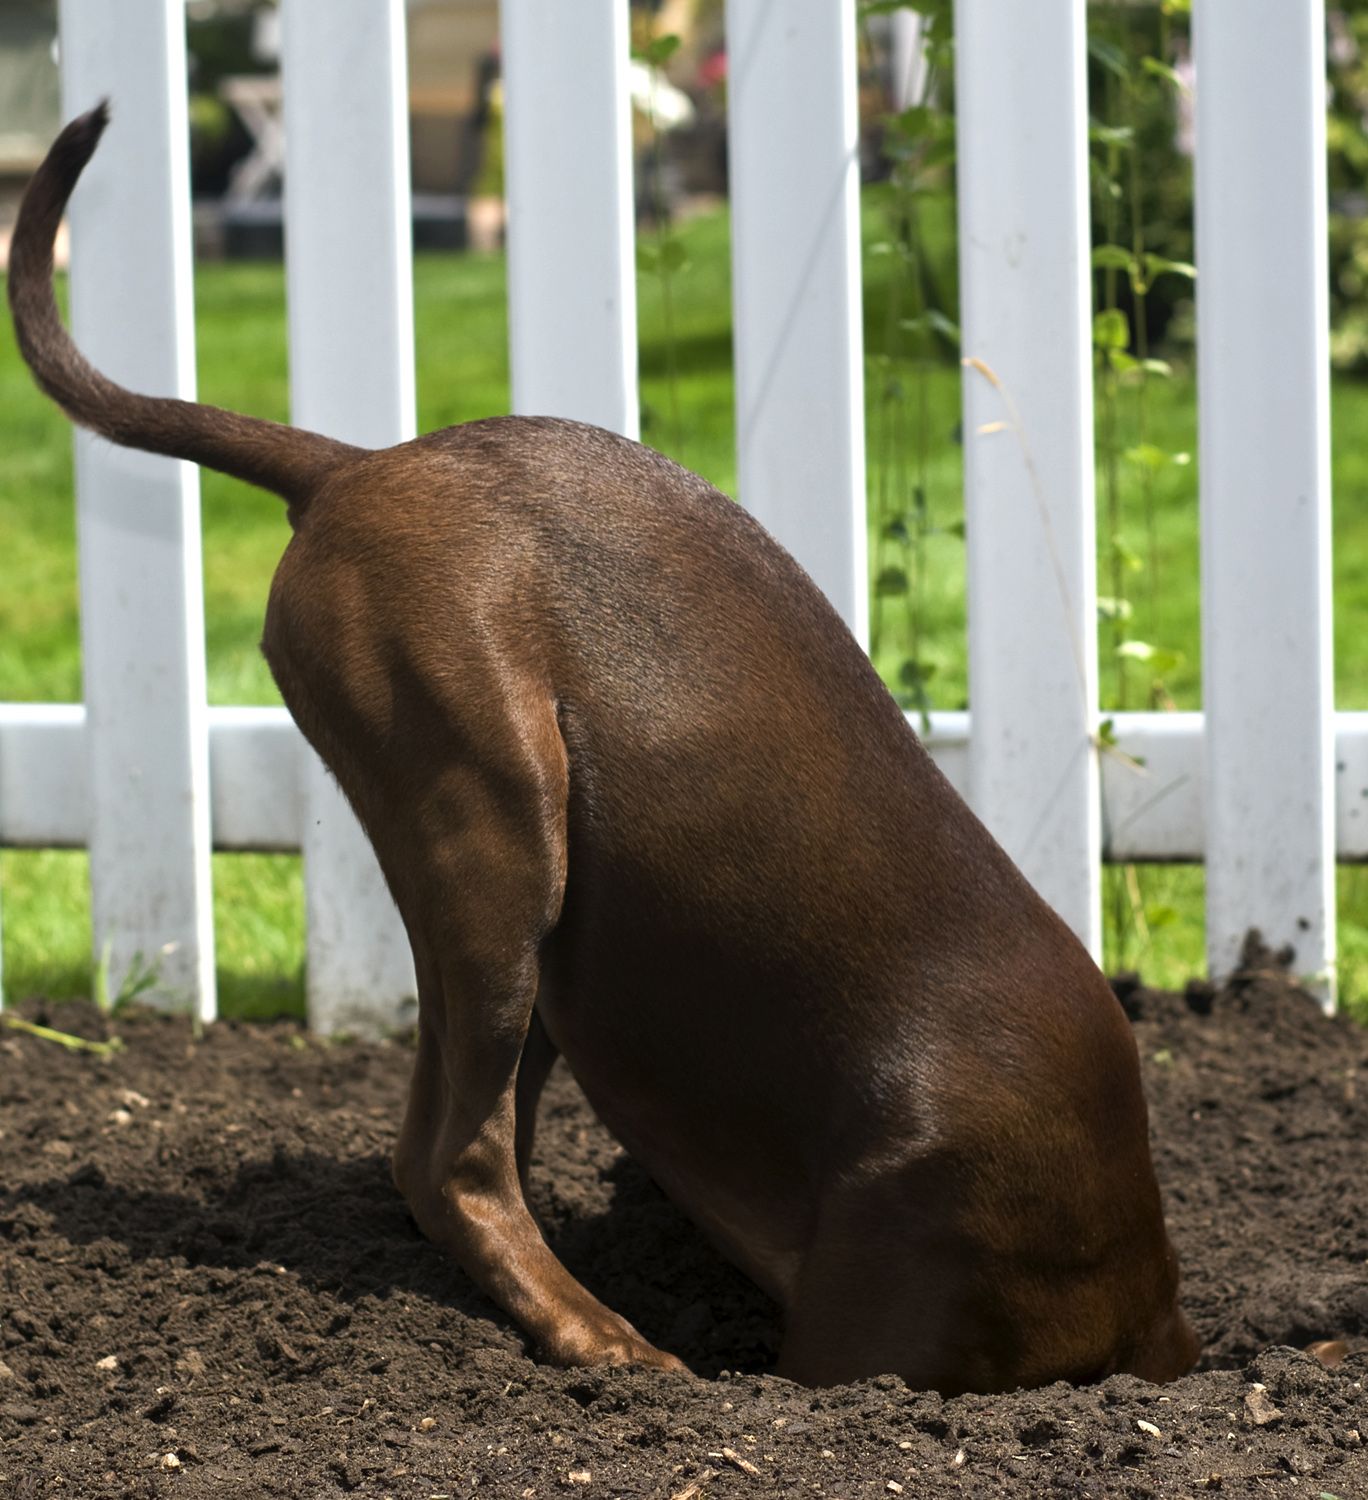 Dog digging a hole next to a fence with his head in the hole.